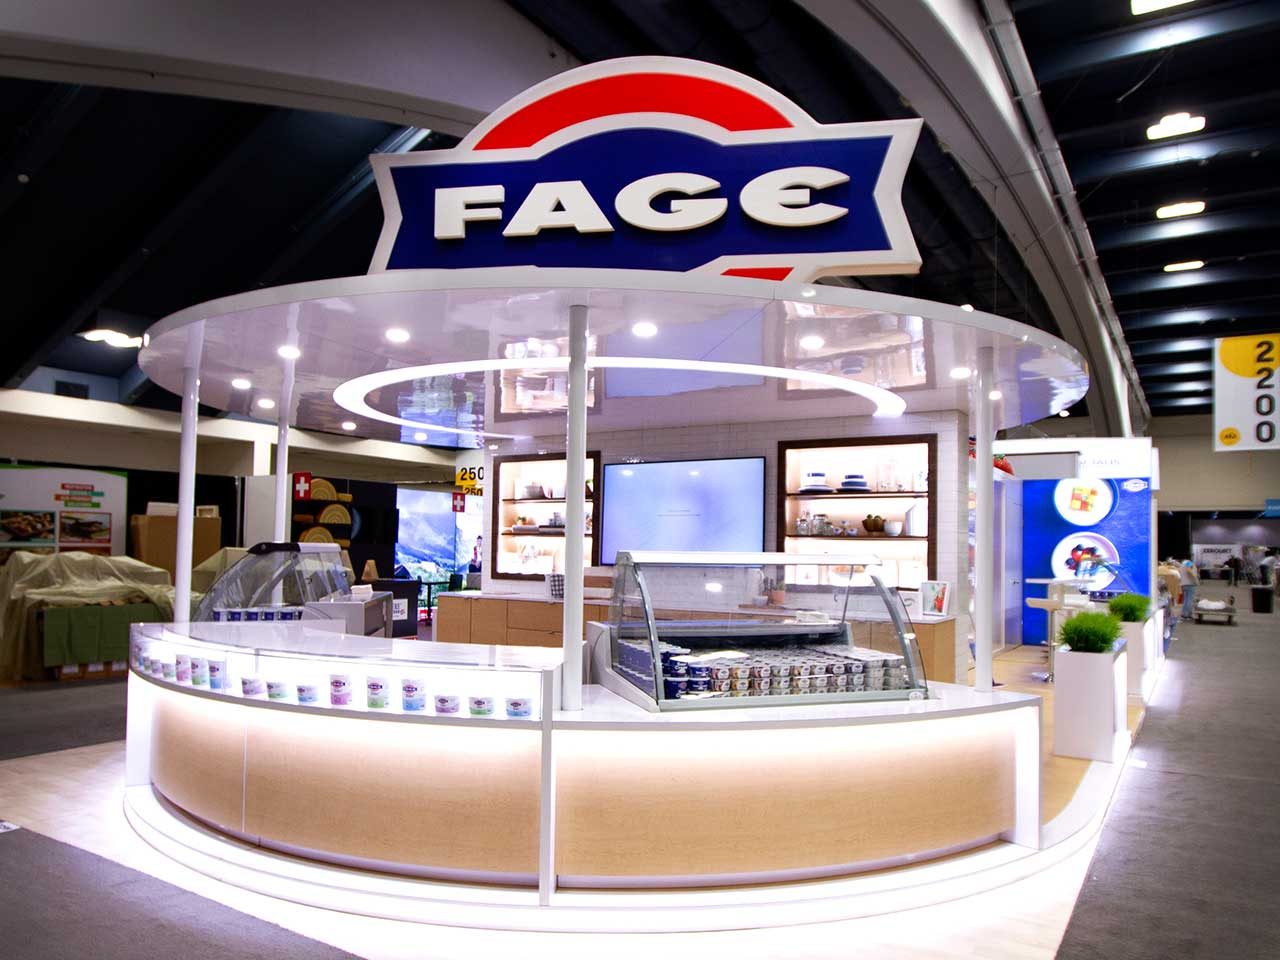 Island Exhibit for Fage at Winter Fancy Food